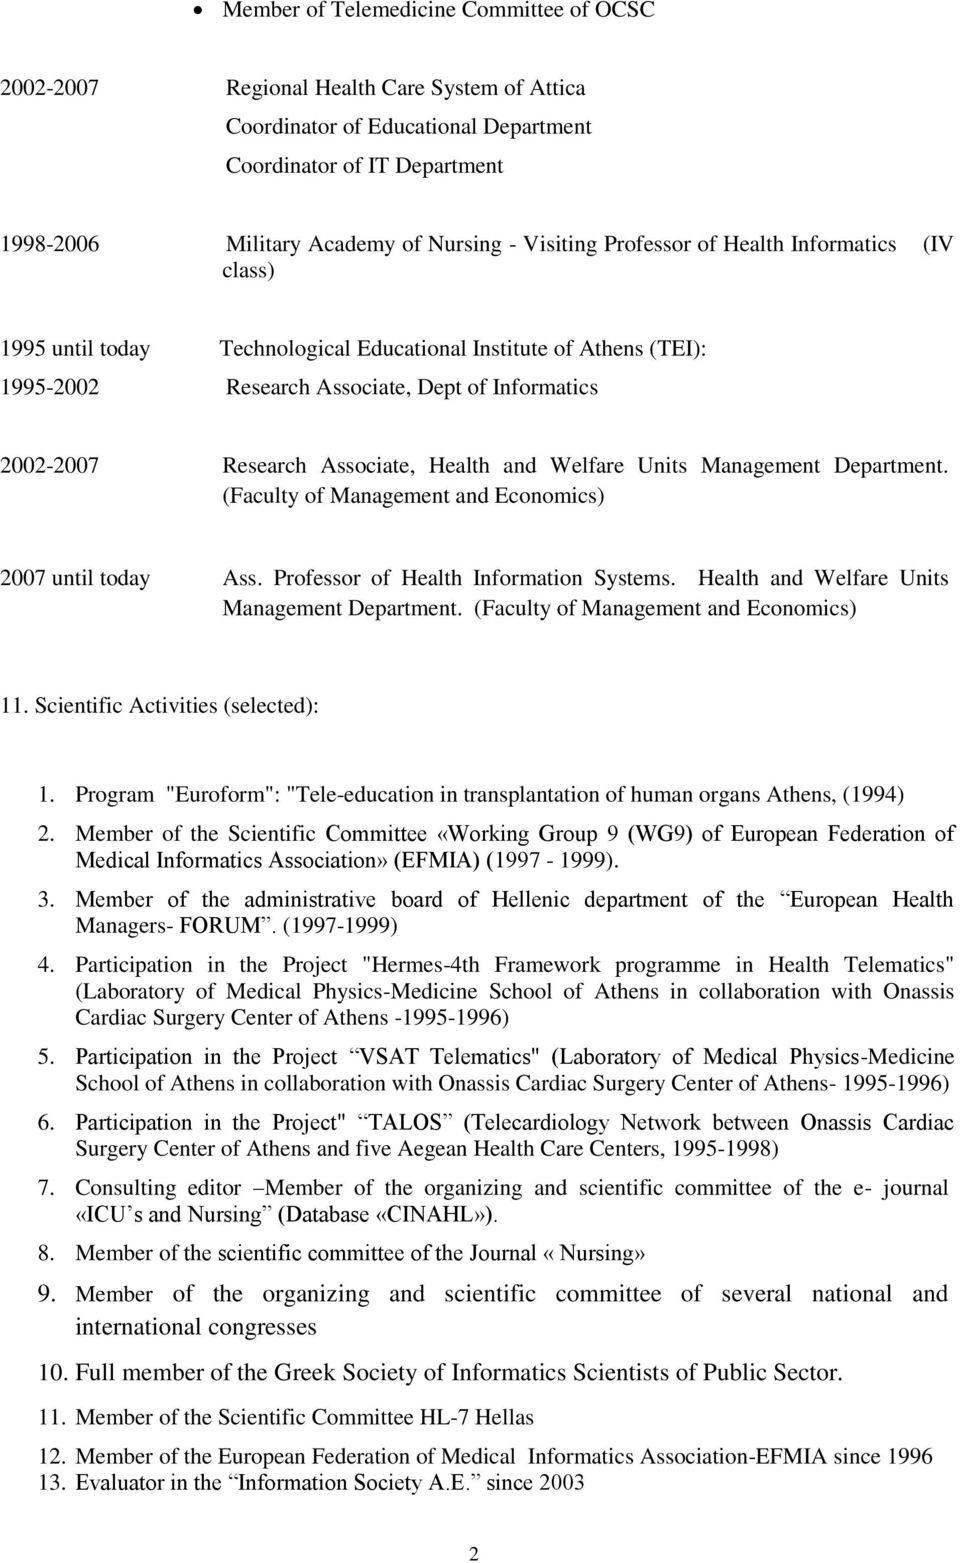 Associate, Health and Welfare Units Management Department. (Faculty of Management and Economics) 2007 until today Ass. Professor of Health Information Systems.